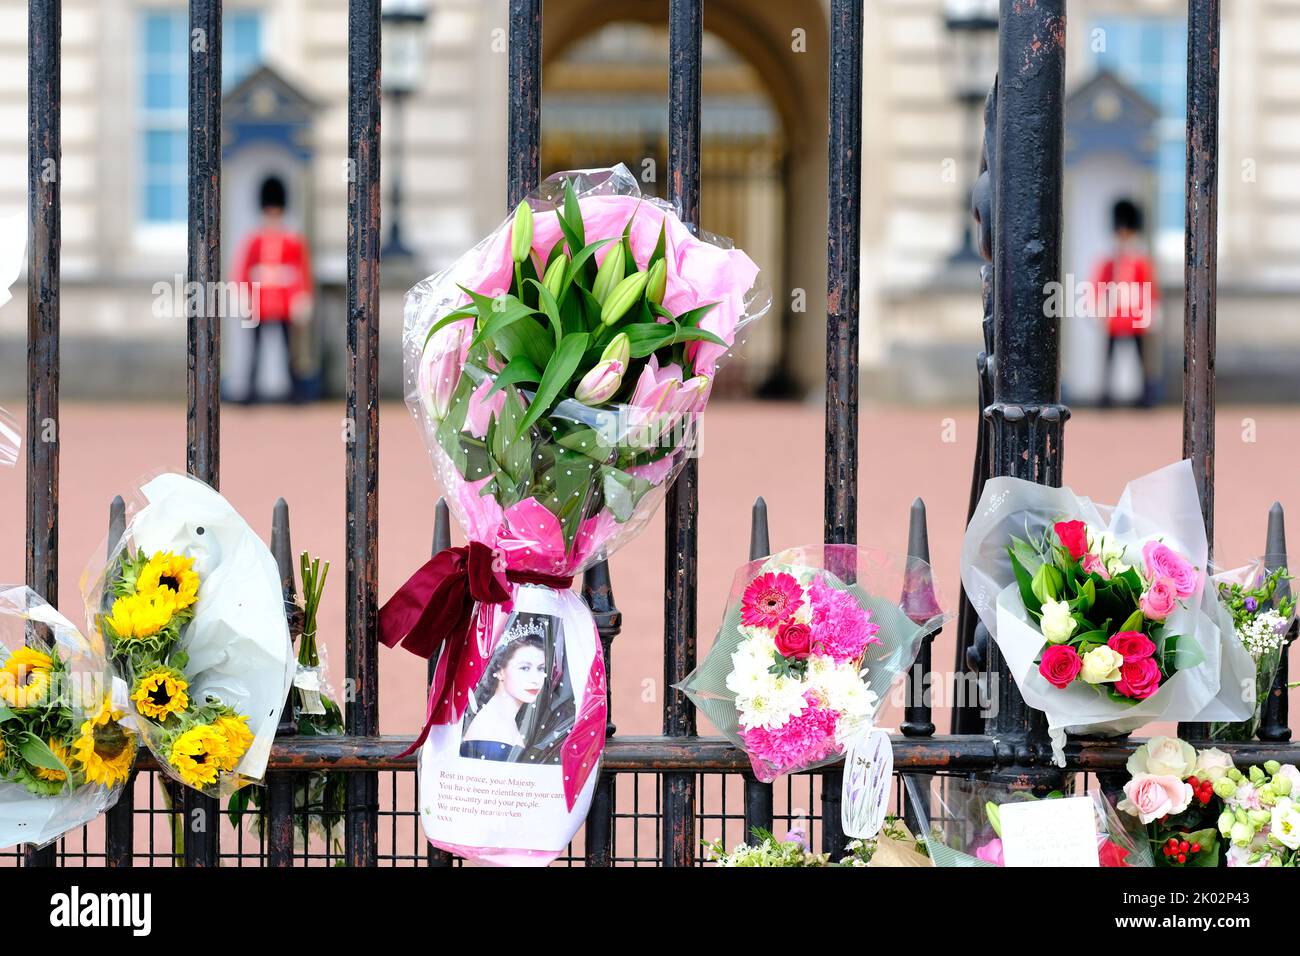 Buckingham Palace, London, UK – Friday 9th September 2022 – Soldiers stand guard behind the railings at Buckingham Palace which are now covered in flowers from the public as Britain mourns the death of Queen Elizabeth II. Photo Steven May / Alamy Live News Stock Photo